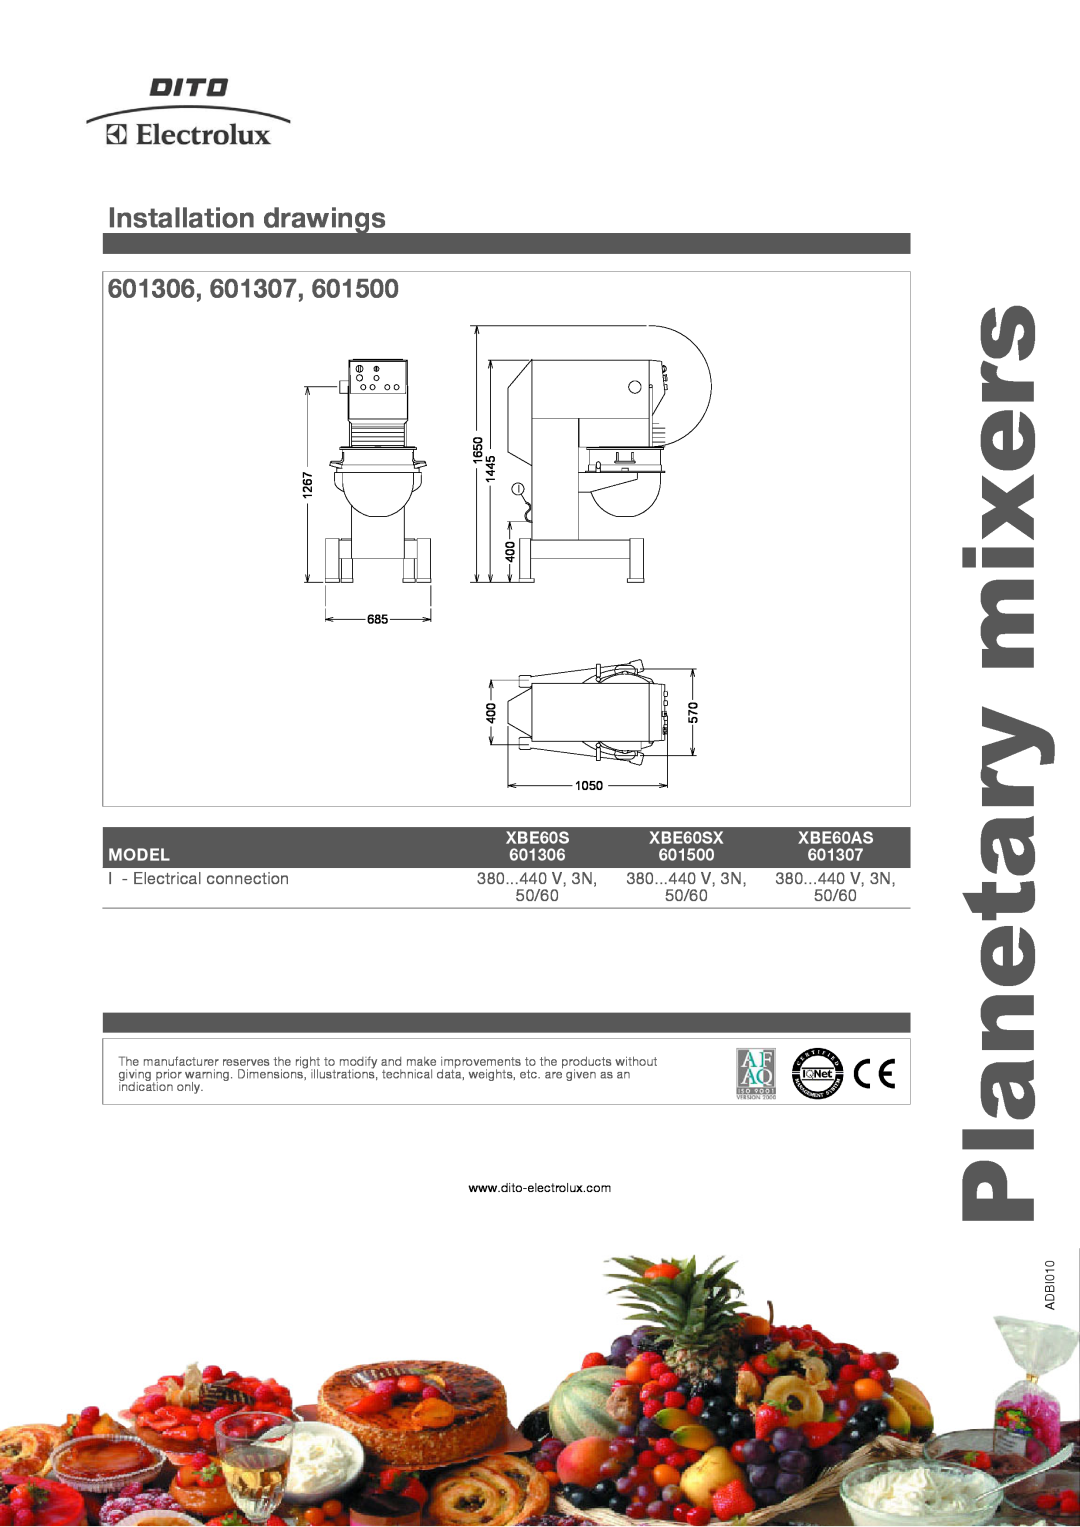 Electrolux manual Installation drawings, 601306, 601307, mixers, Planetary, XBE60SX, XBE60AS, Model, 601500 